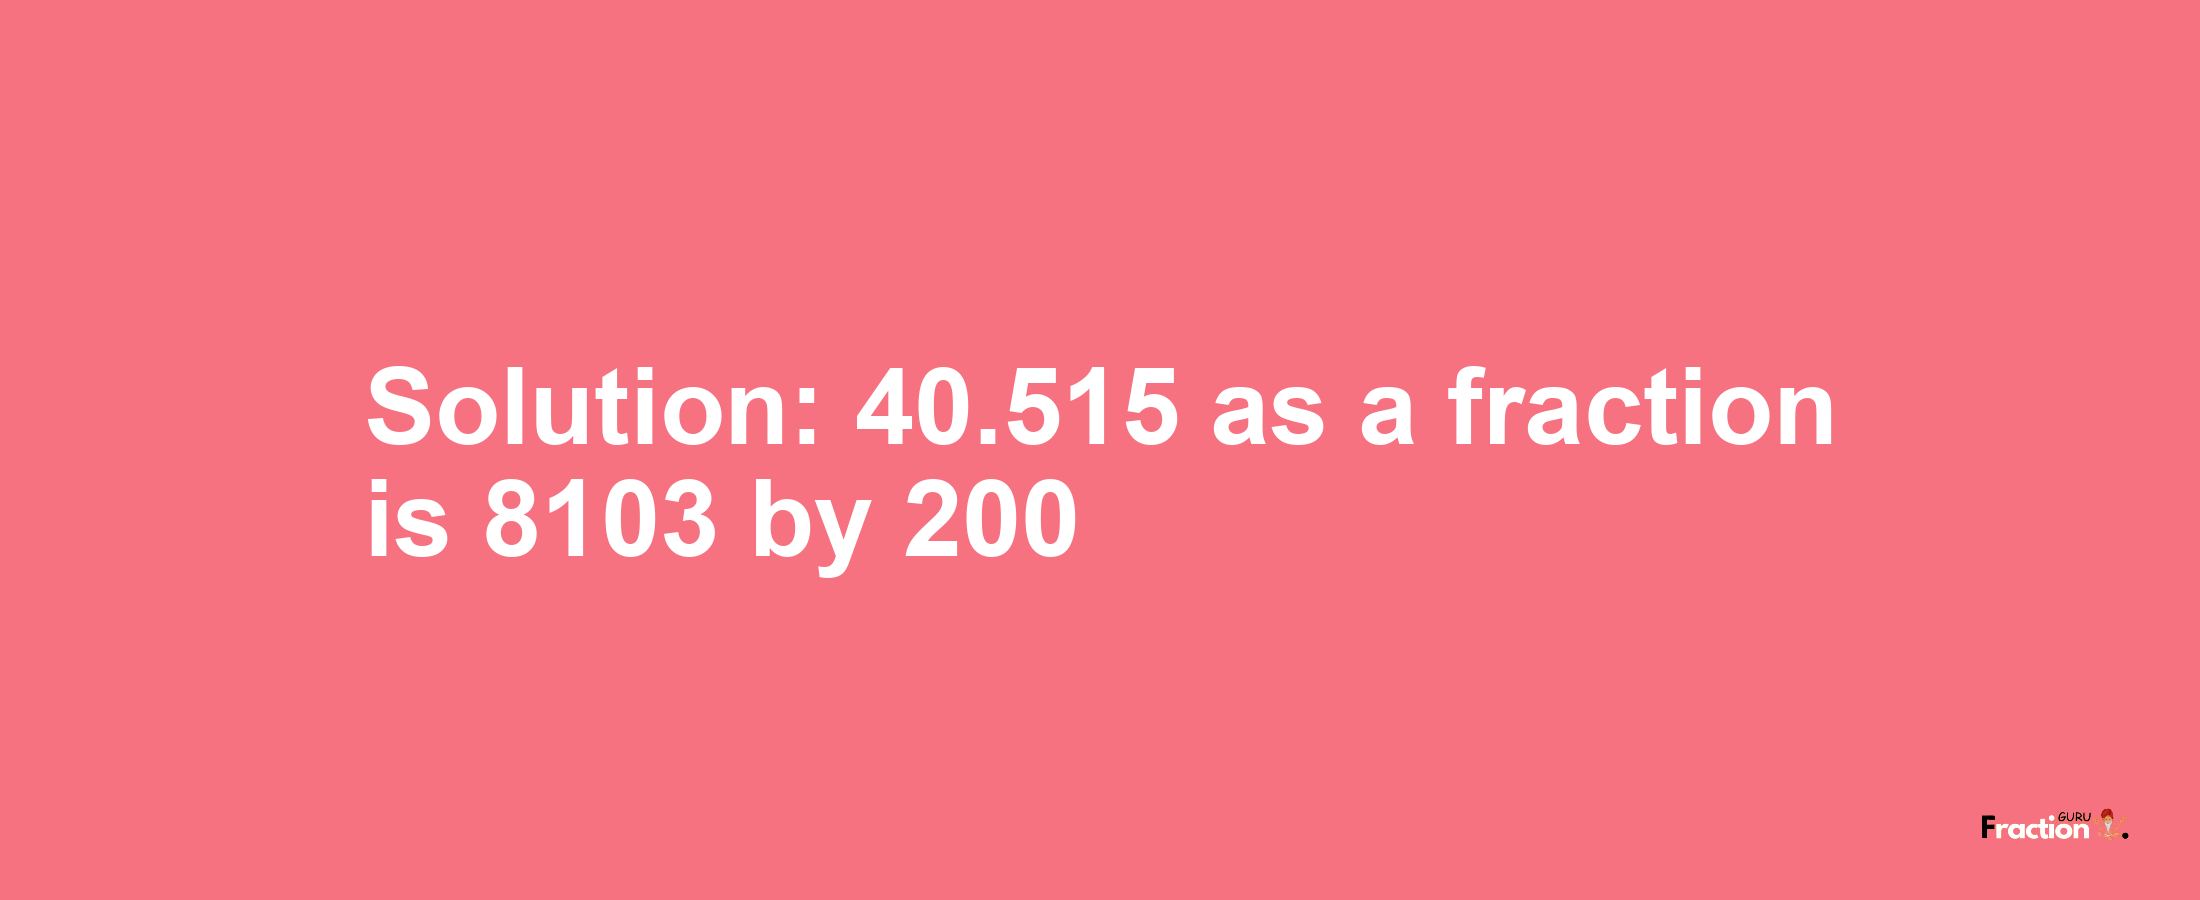 Solution:40.515 as a fraction is 8103/200